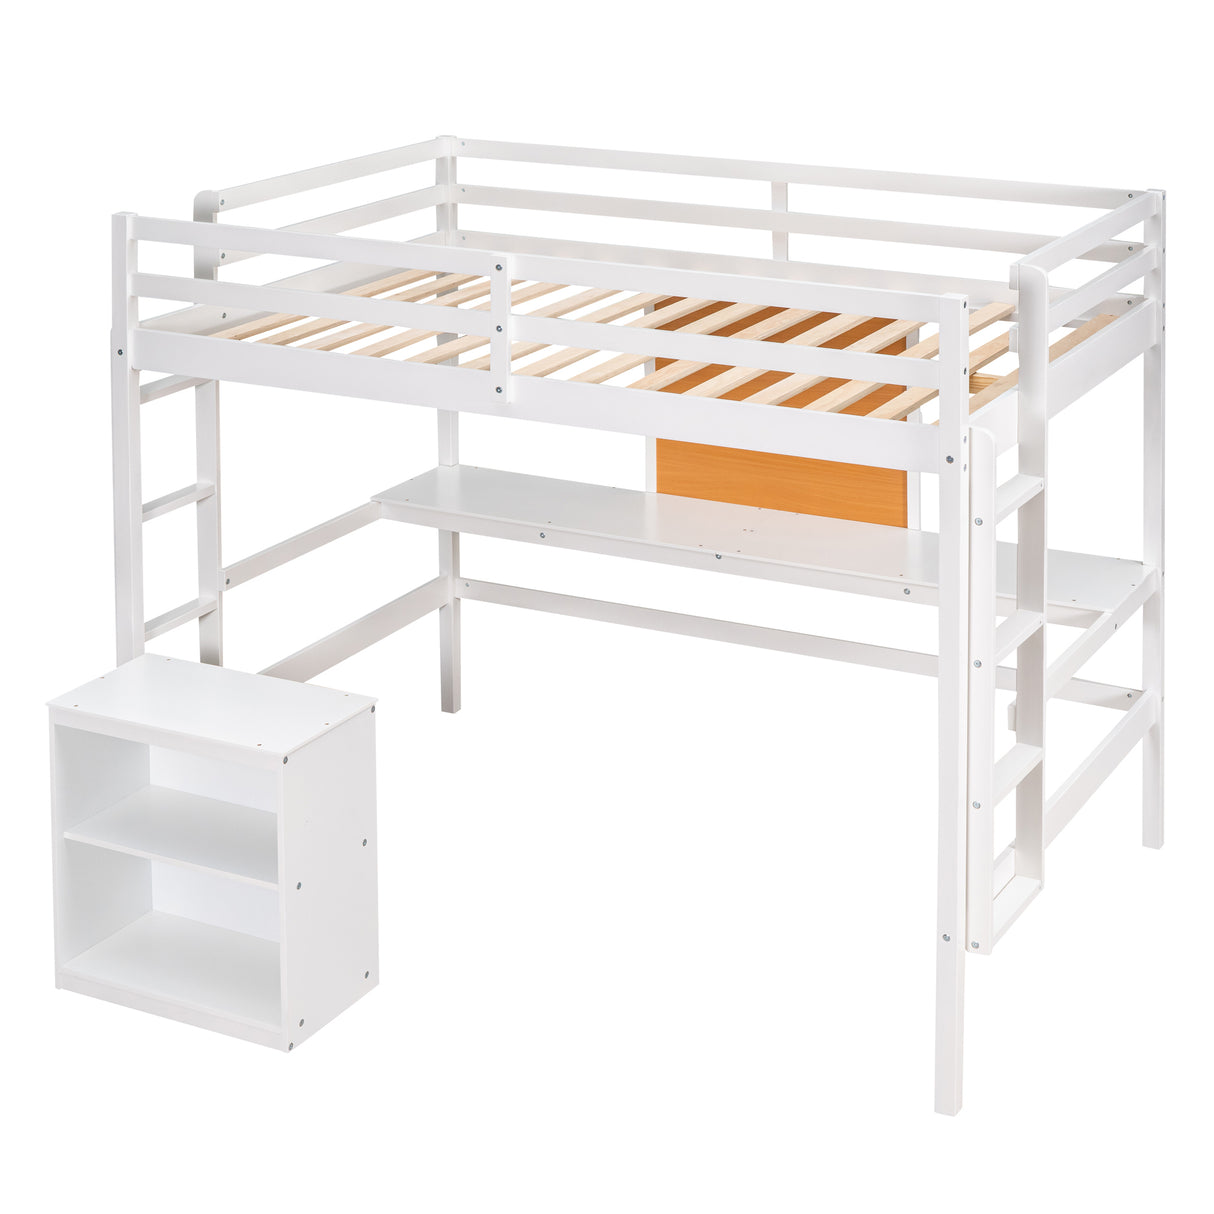 Twin size Loft Bed with Desk and Writing Board, Wooden Loft Bed with Desk & 2 Drawers Cabinet- White - Home Elegance USA